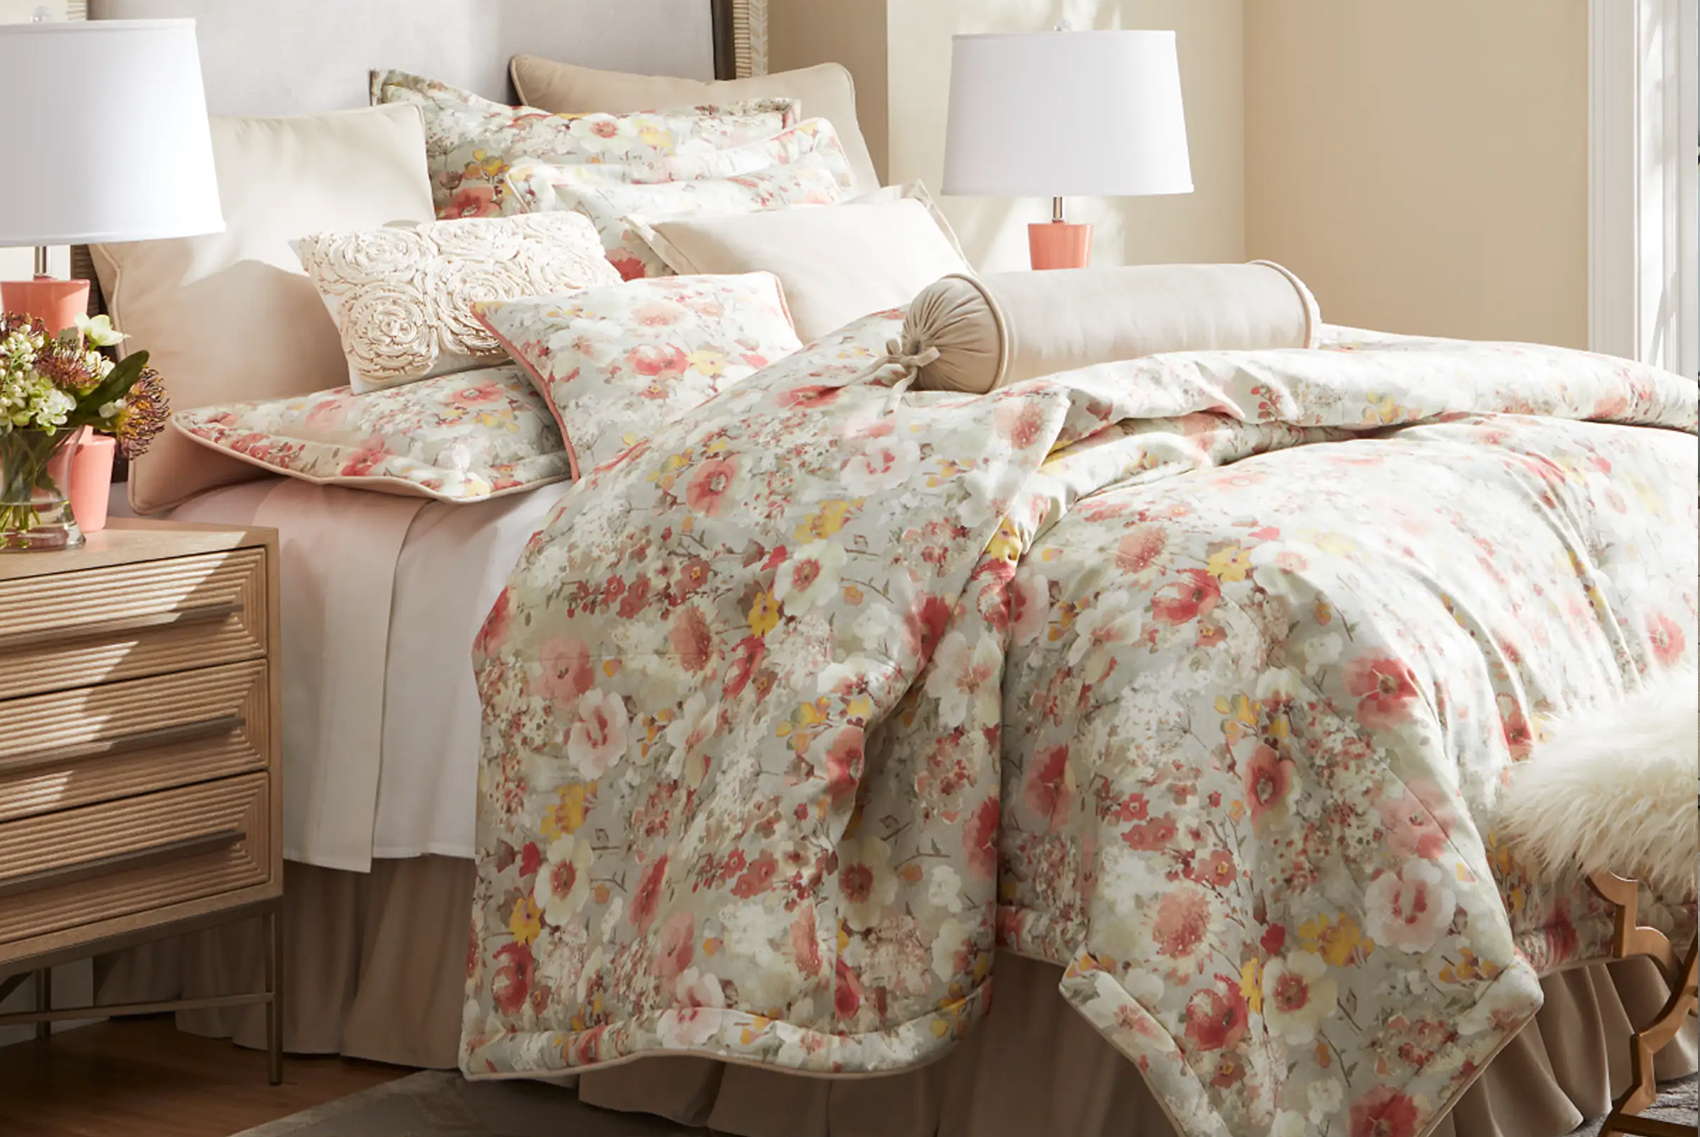 How to Choose Luxury Bedding